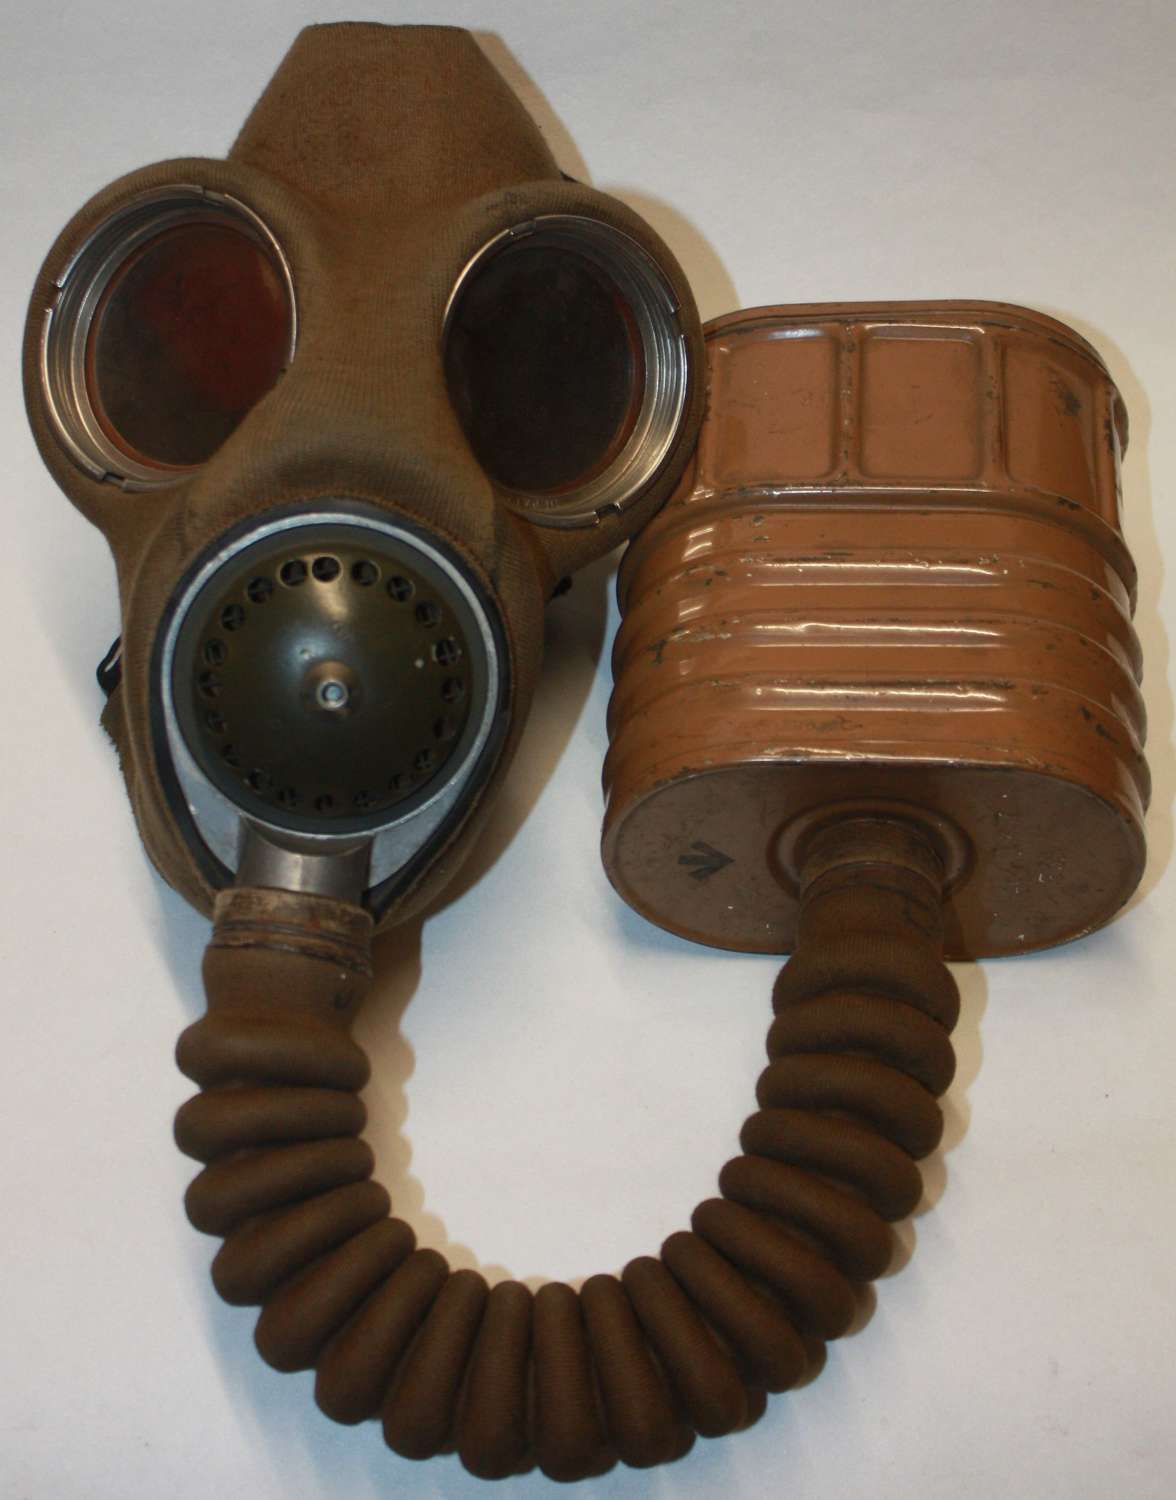 A GOOD EARLY WWII GAS MASK WHICH IS 1937 DATED